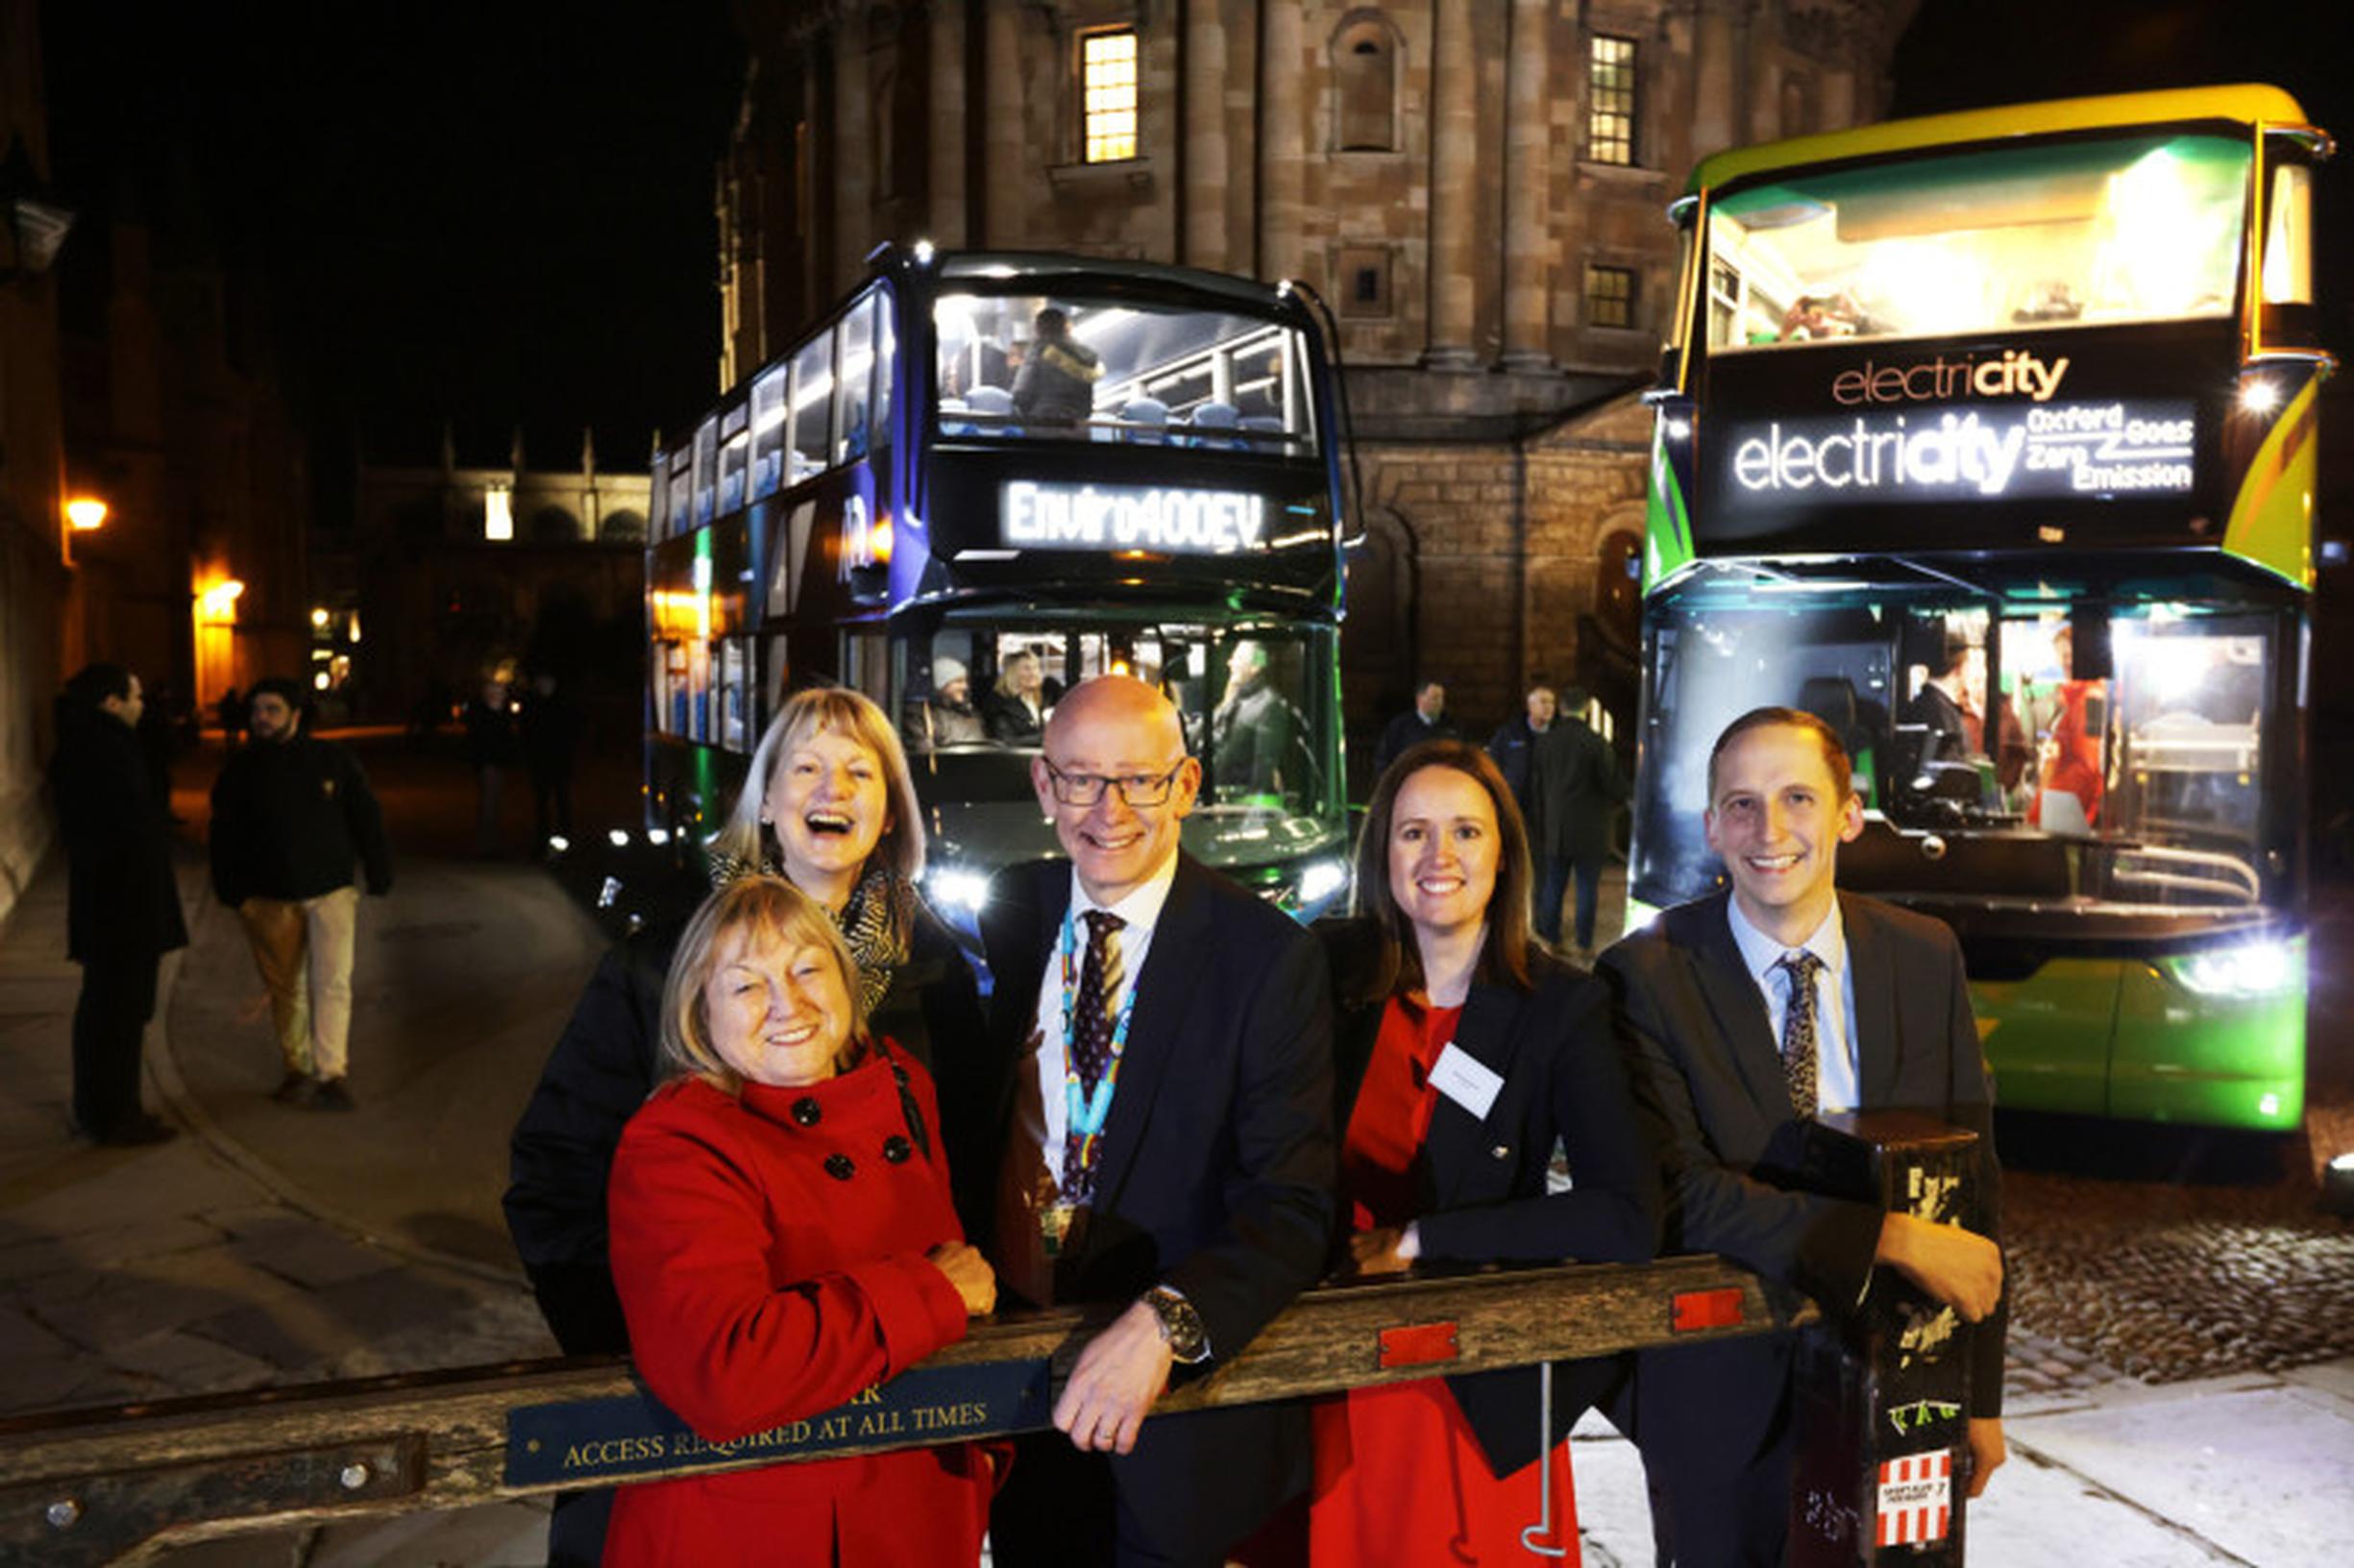 From left: Oxfordshire County Council Cabinet Member Judy Roberts, Leader Liz Leffman, CEO Martin Reeves, with Stagecoach MD Rachel Geliamassi and OBC MD Luke Marion